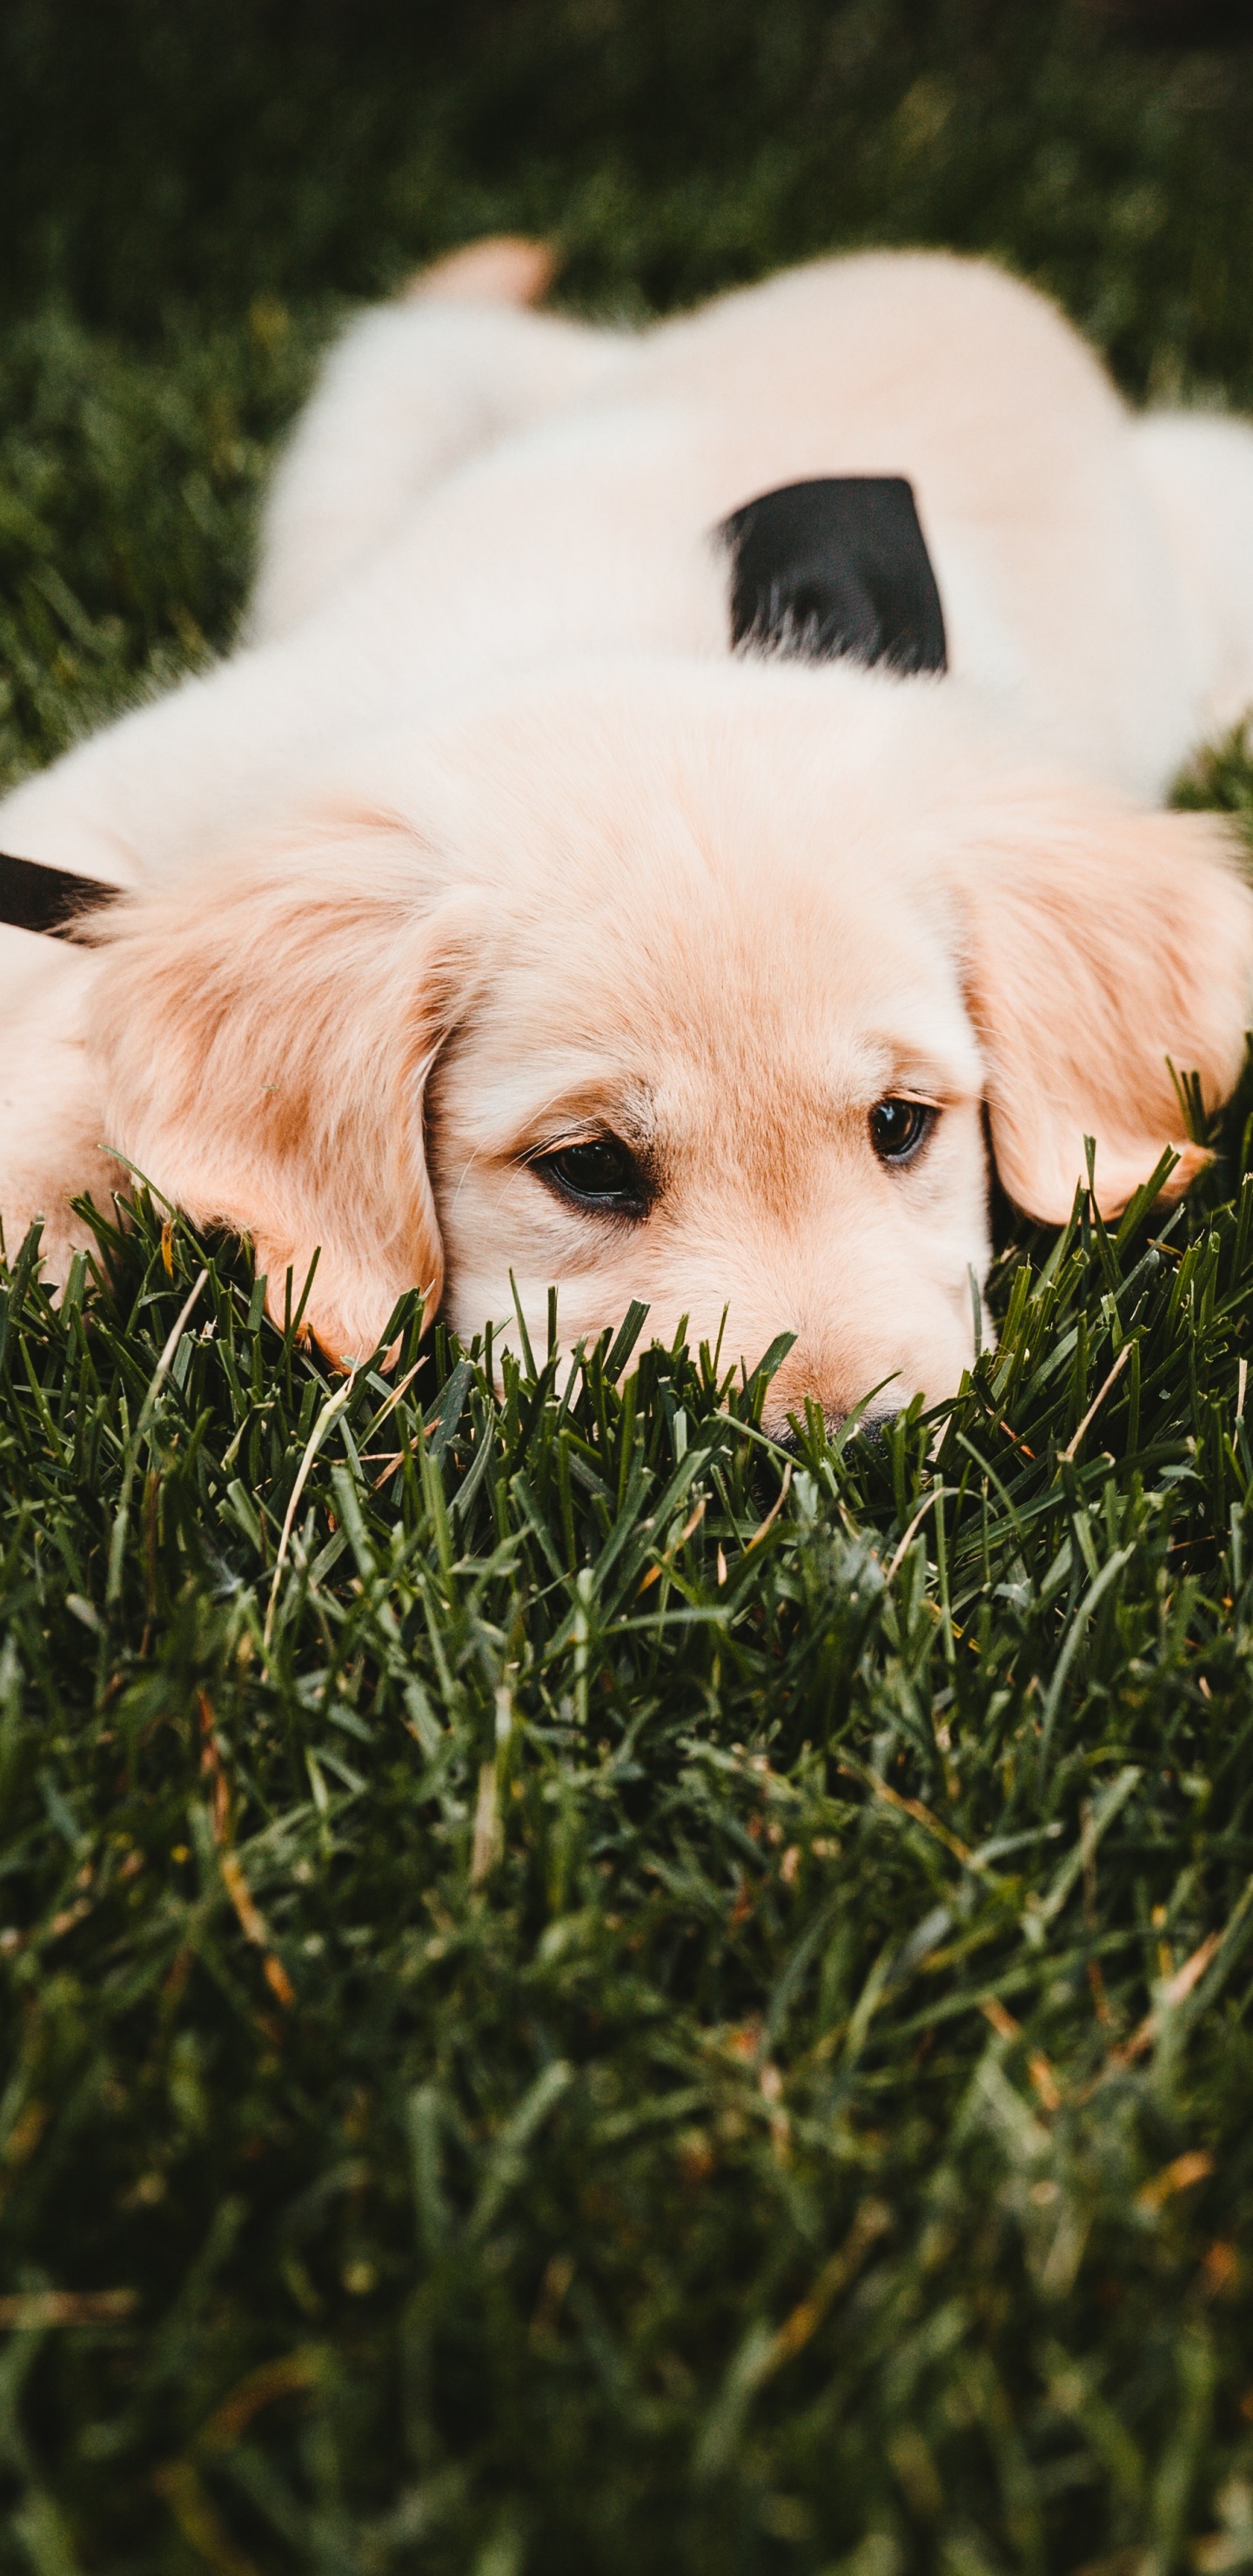 White Short Coated Dog Lying on Green Grass Field During Daytime. Wallpaper in 1440x2960 Resolution